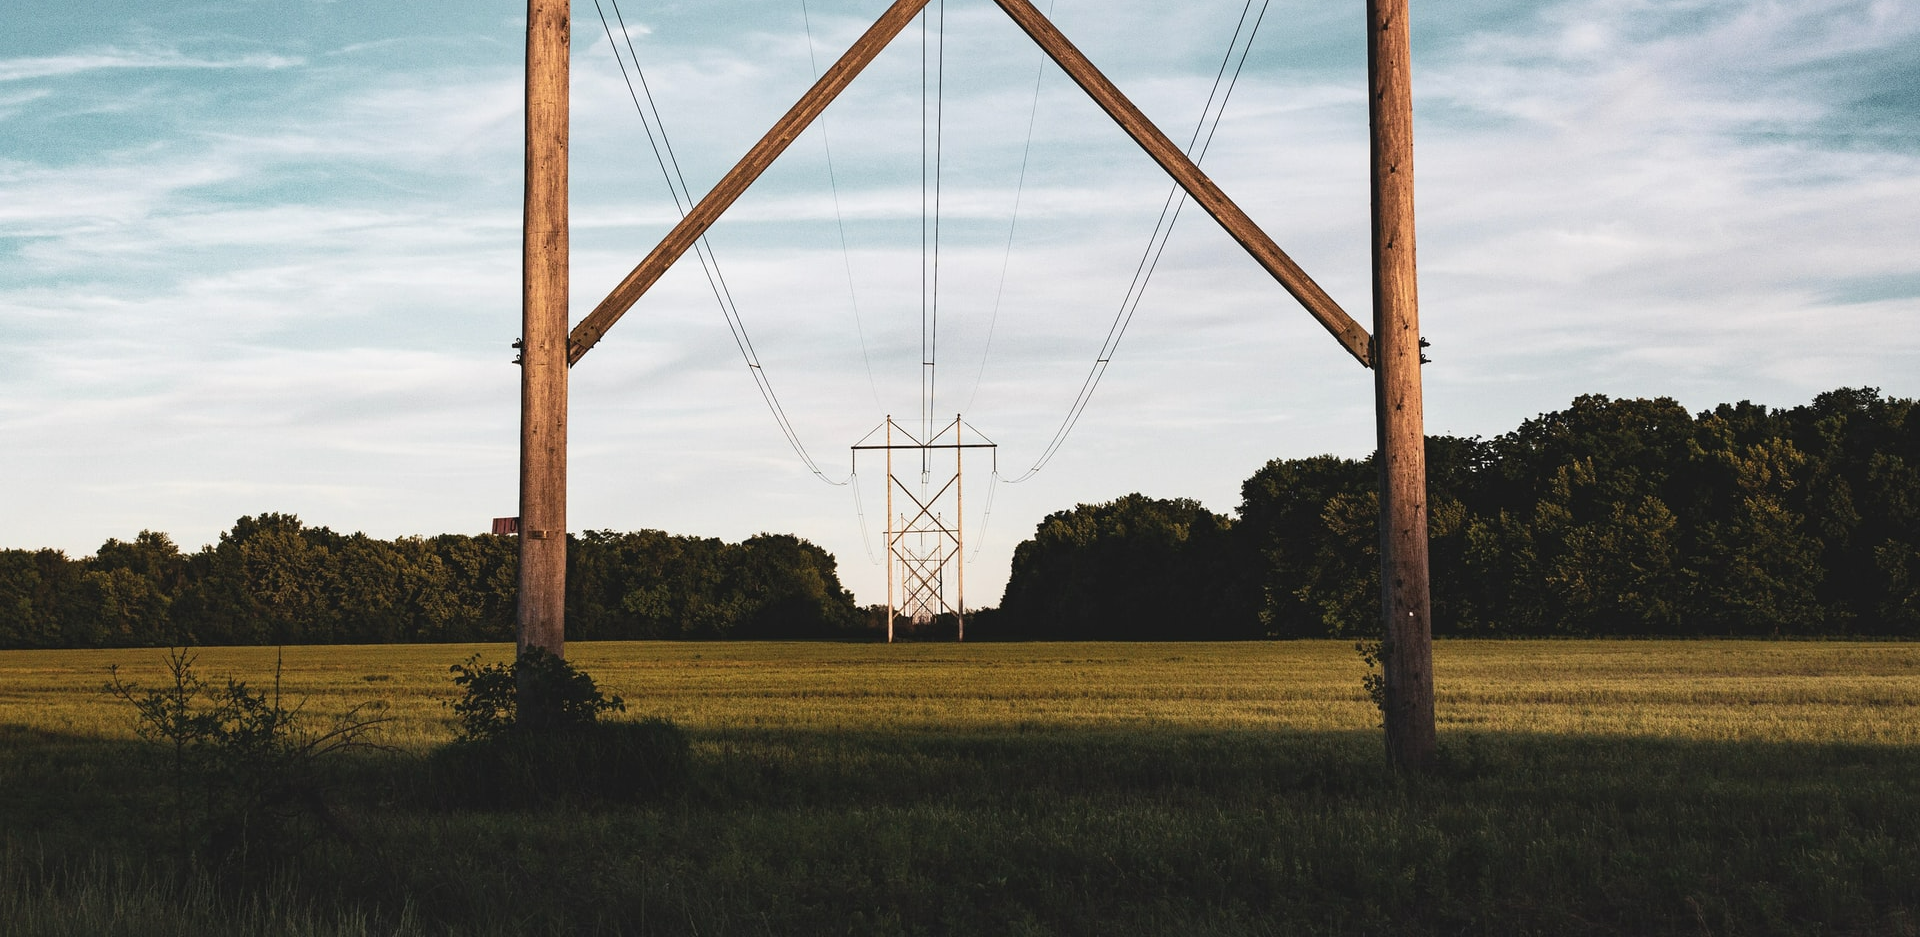 Companies need to focus on building stronger transmission lines to increase overall employee communication.